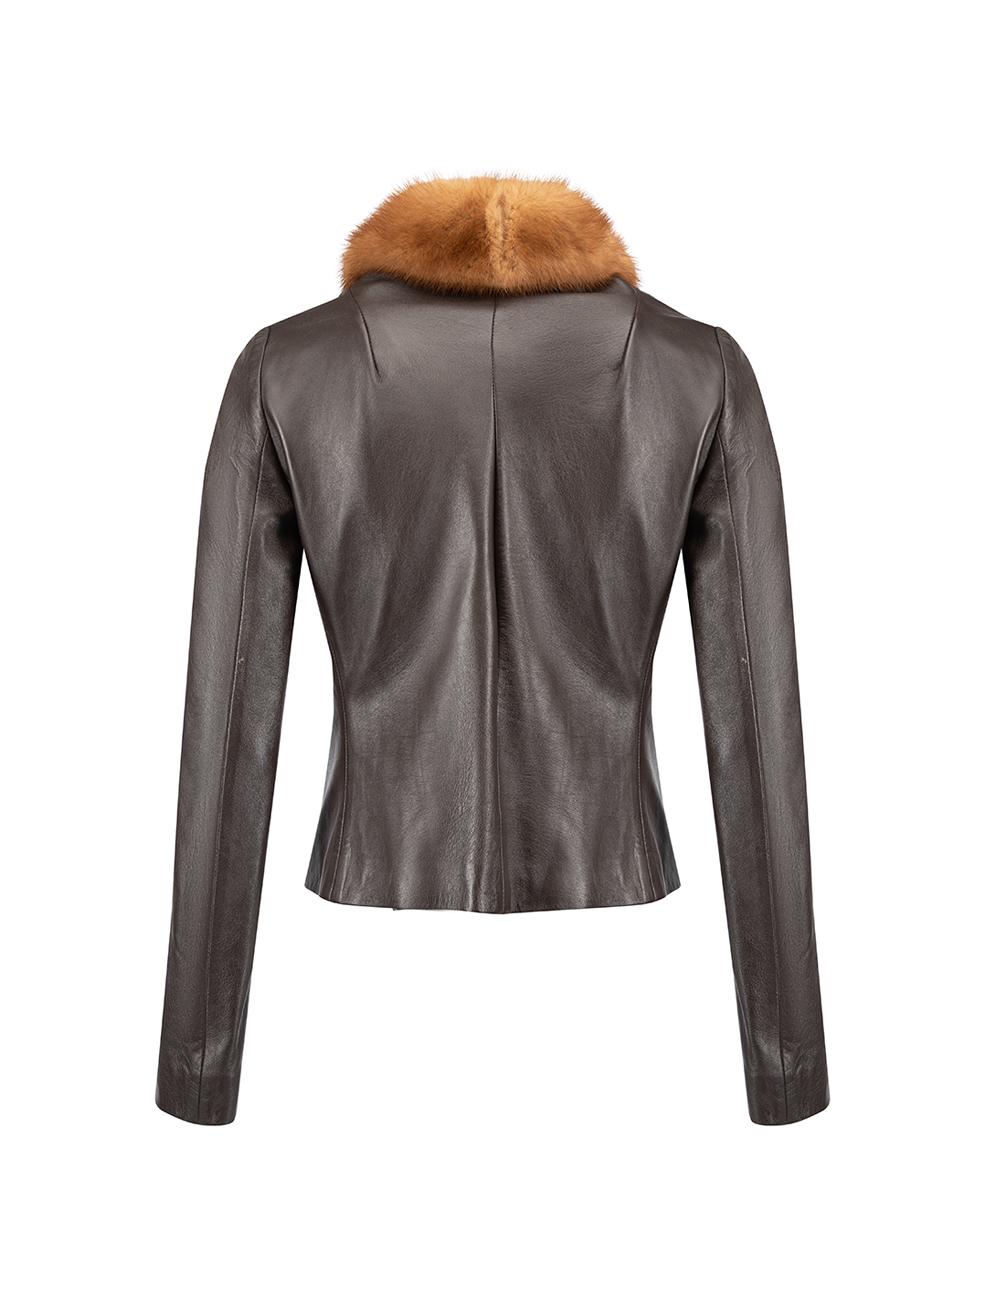 Pre-Loved Dolce & Gabbana Women's Vintage Fox Fur Collar Leather Track Jacket In Excellent Condition In London, GB